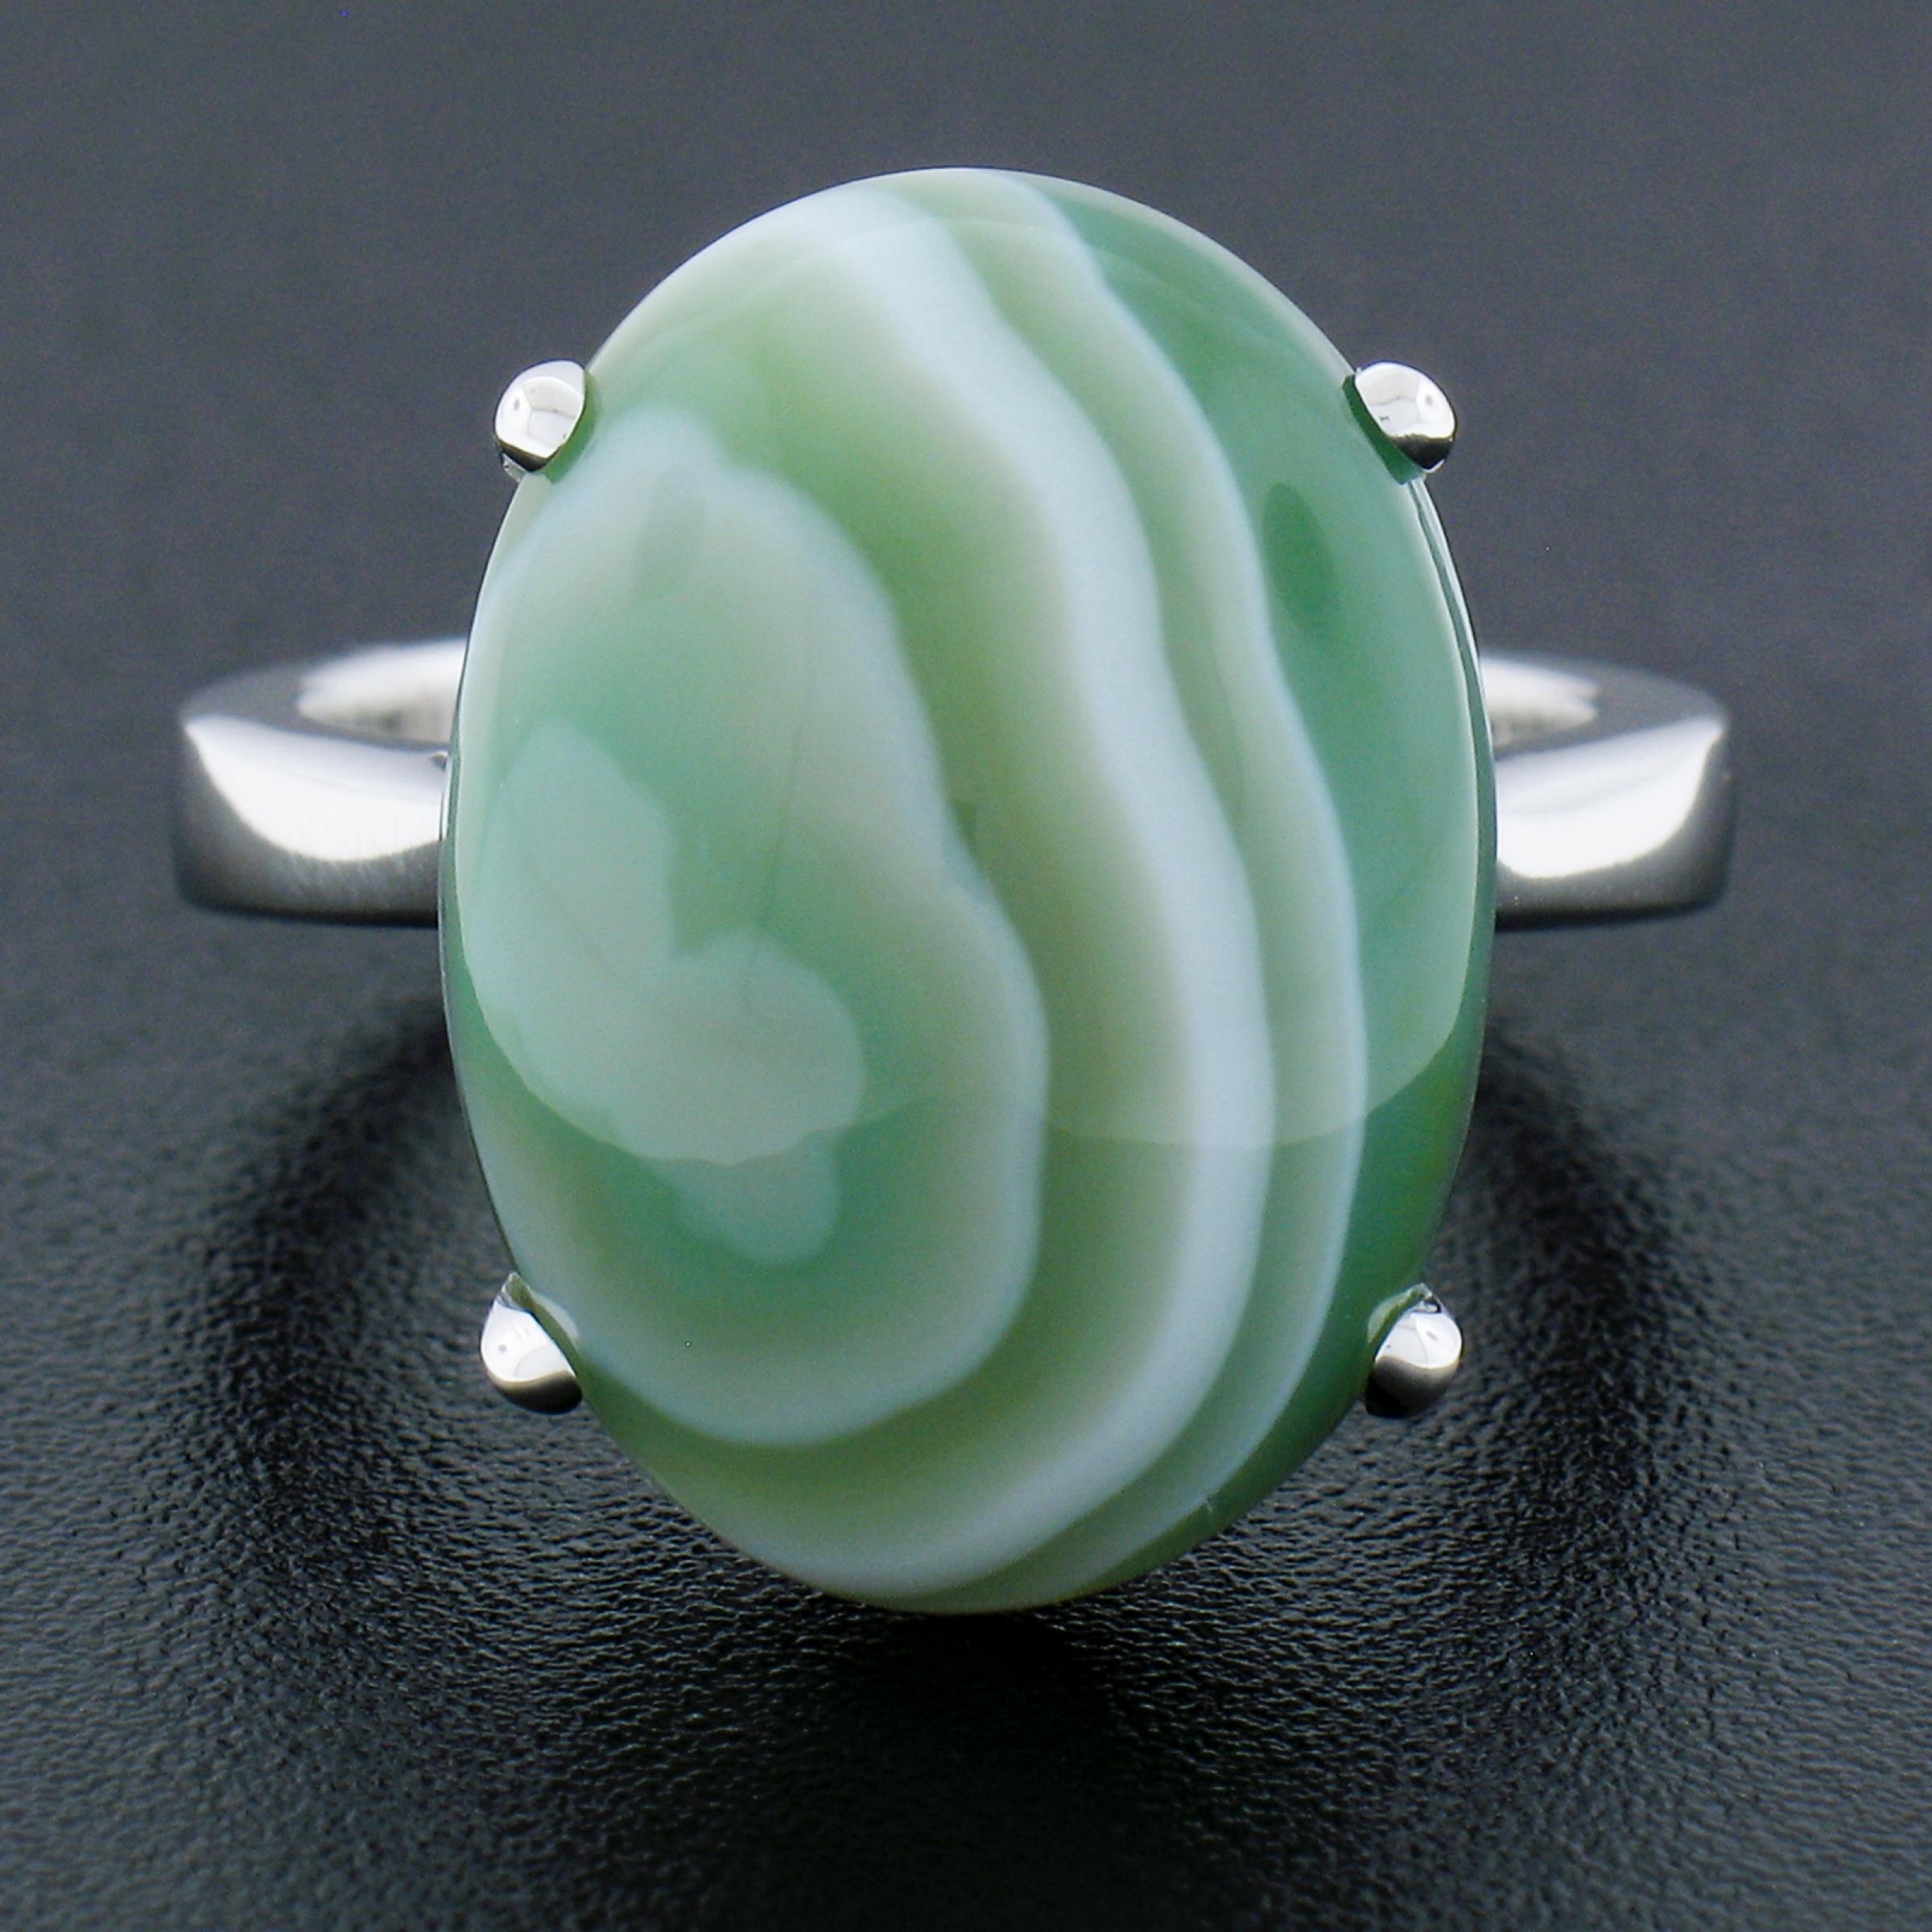 --Stone(s):--
(1) Natural Genuine Agate - Oval Cabochon Cut - Prong Set - Green Color with White Striations Lines - 18x13.2mm (approx.)

Material: Solid 14K White Gold
Weight: 7.76 Grams
Ring Size: 6.5 (Fitted on a finger. We can custom size this